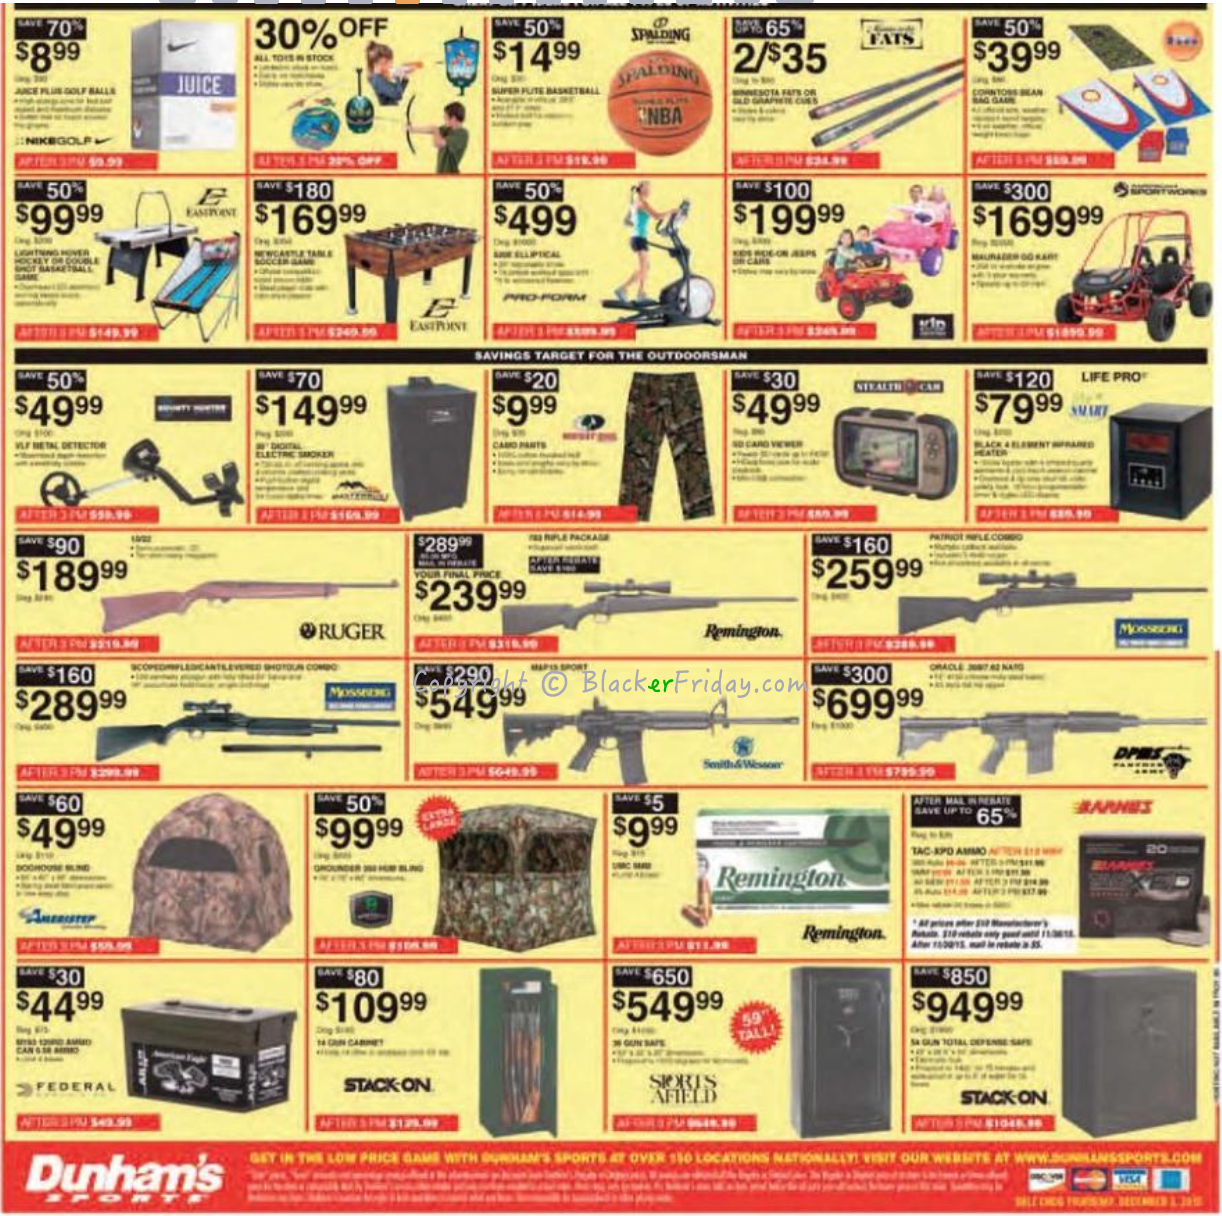 Dunham’s Sports Black Friday 2016 Sale, Ad Scans & Deals - What Stores Haven't Leaked Their Black Friday Ad Yet